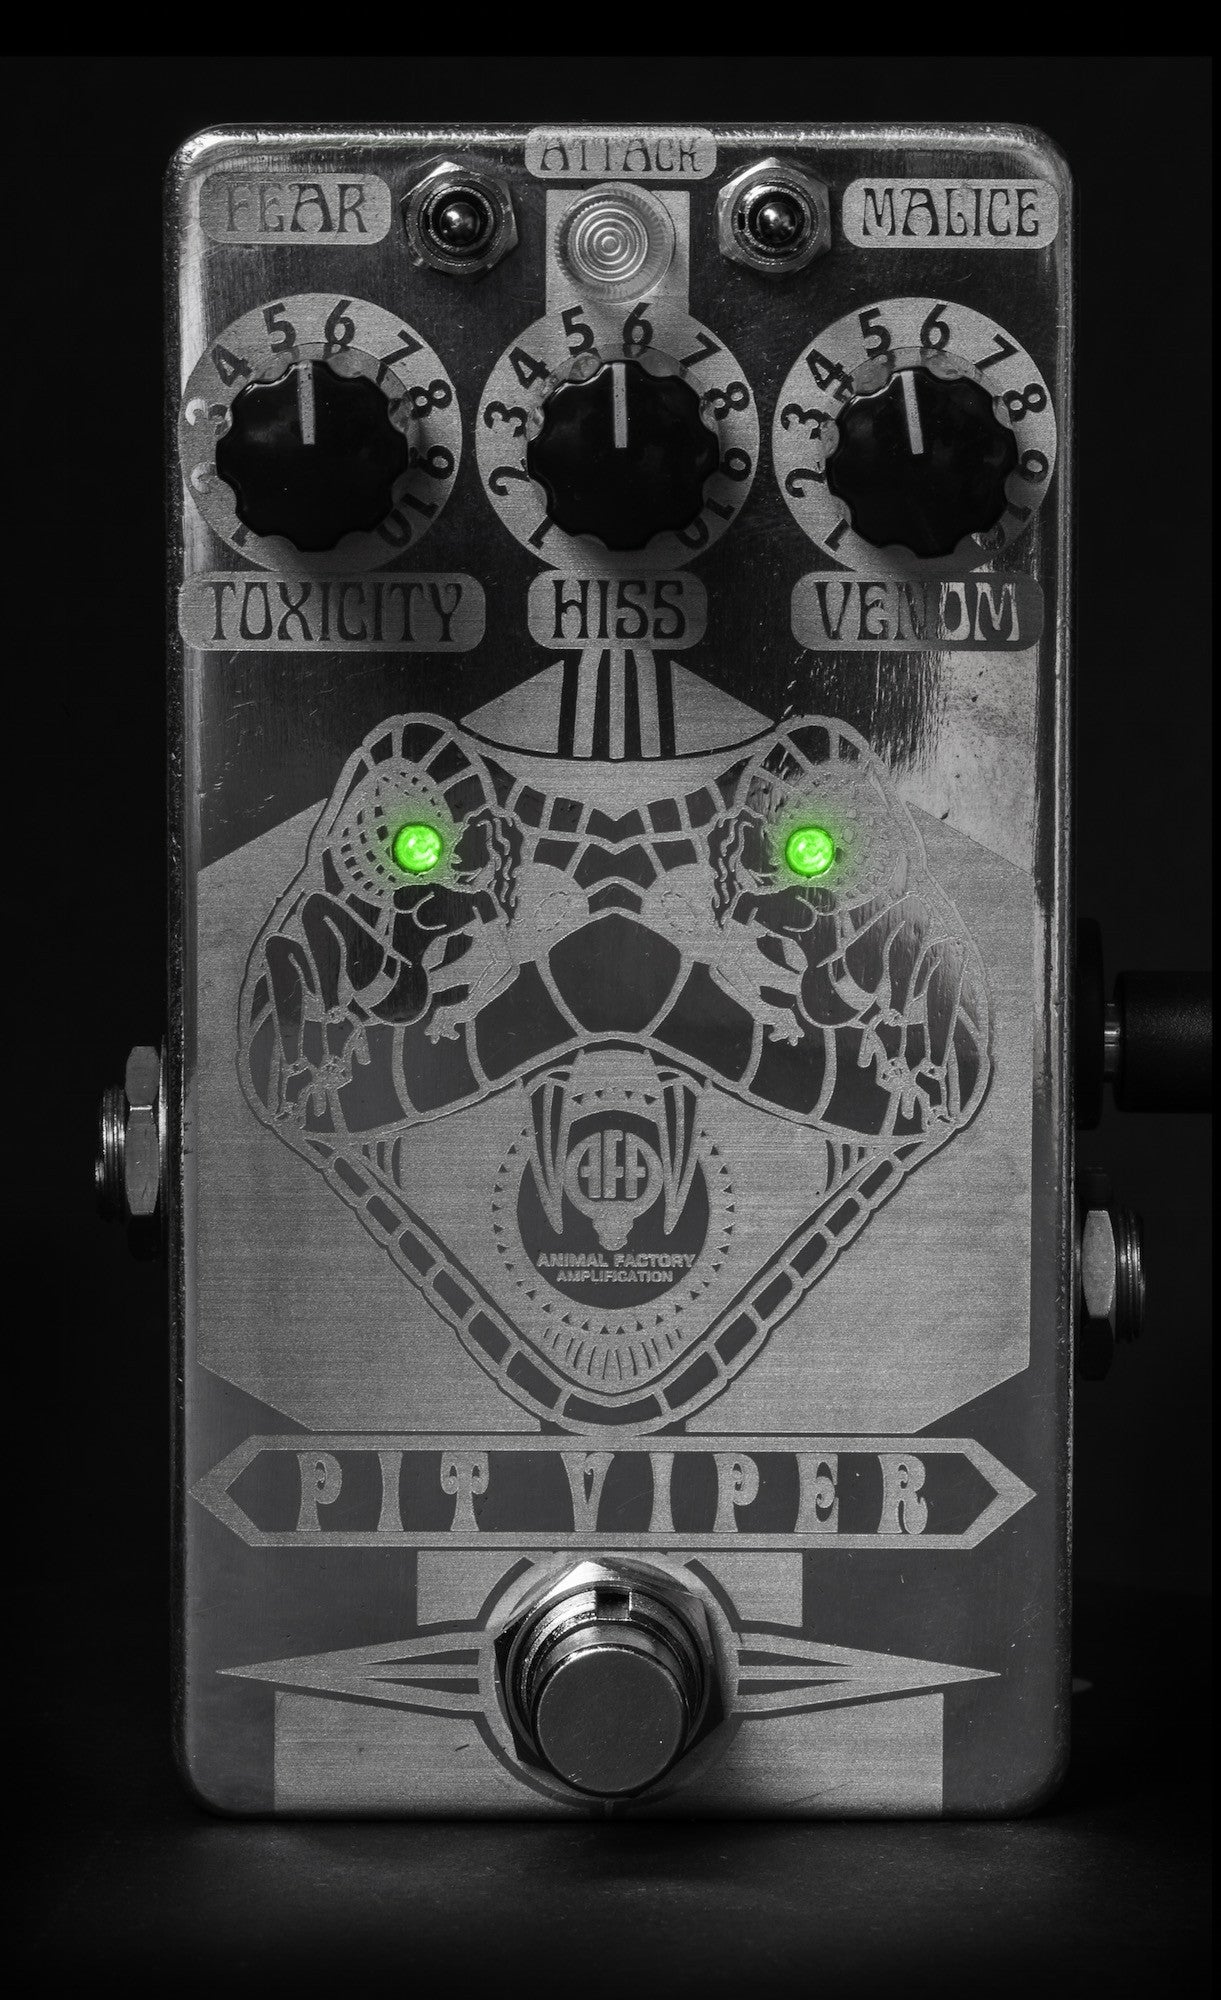 Animal Factory Pit Viper Overdrive 2015 Edition, still available in EU